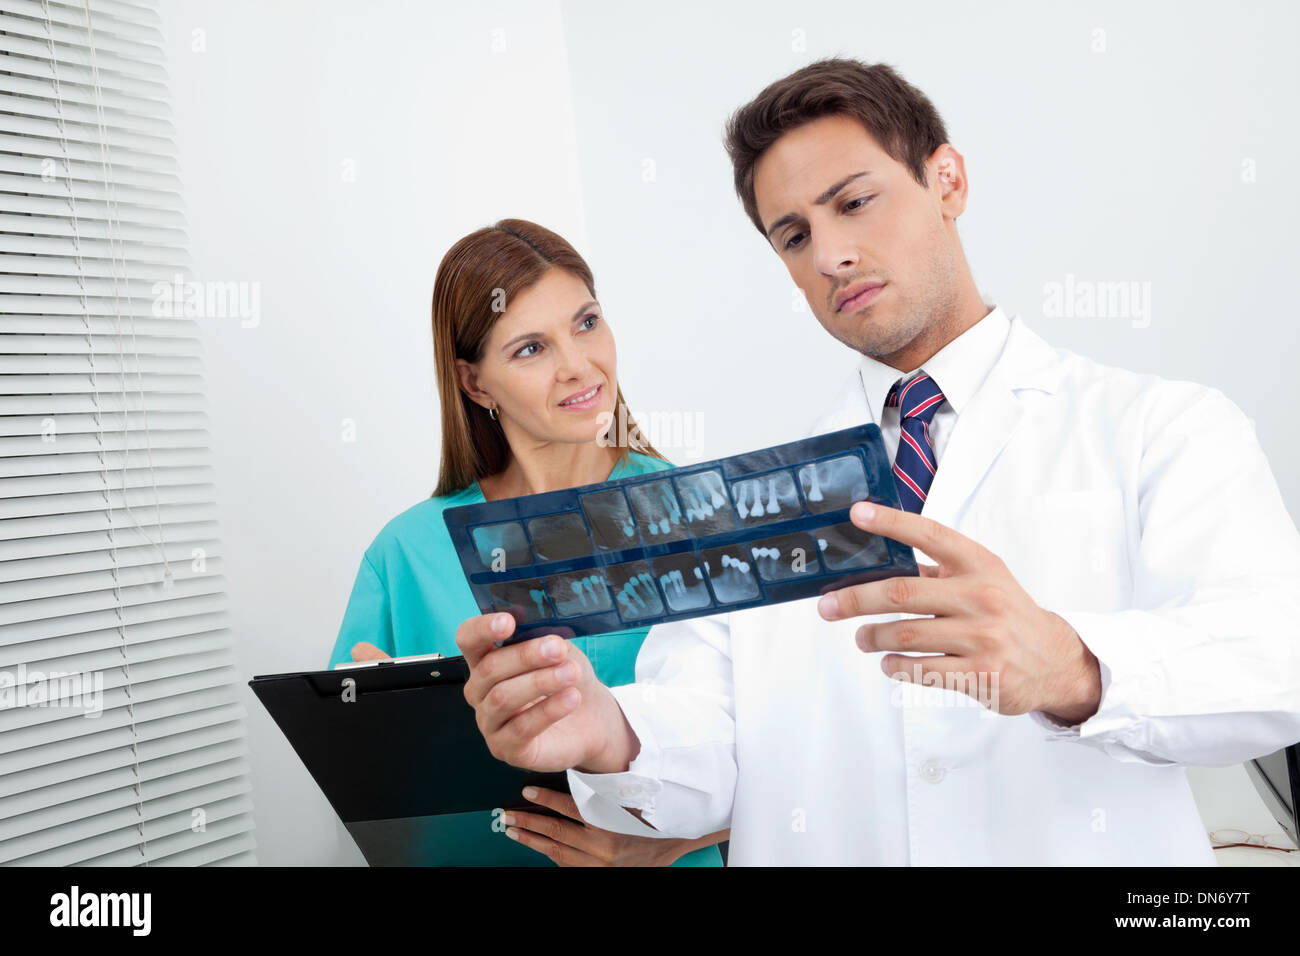 Doctor And Assistant Analyzing Patient's Report Stock Photo